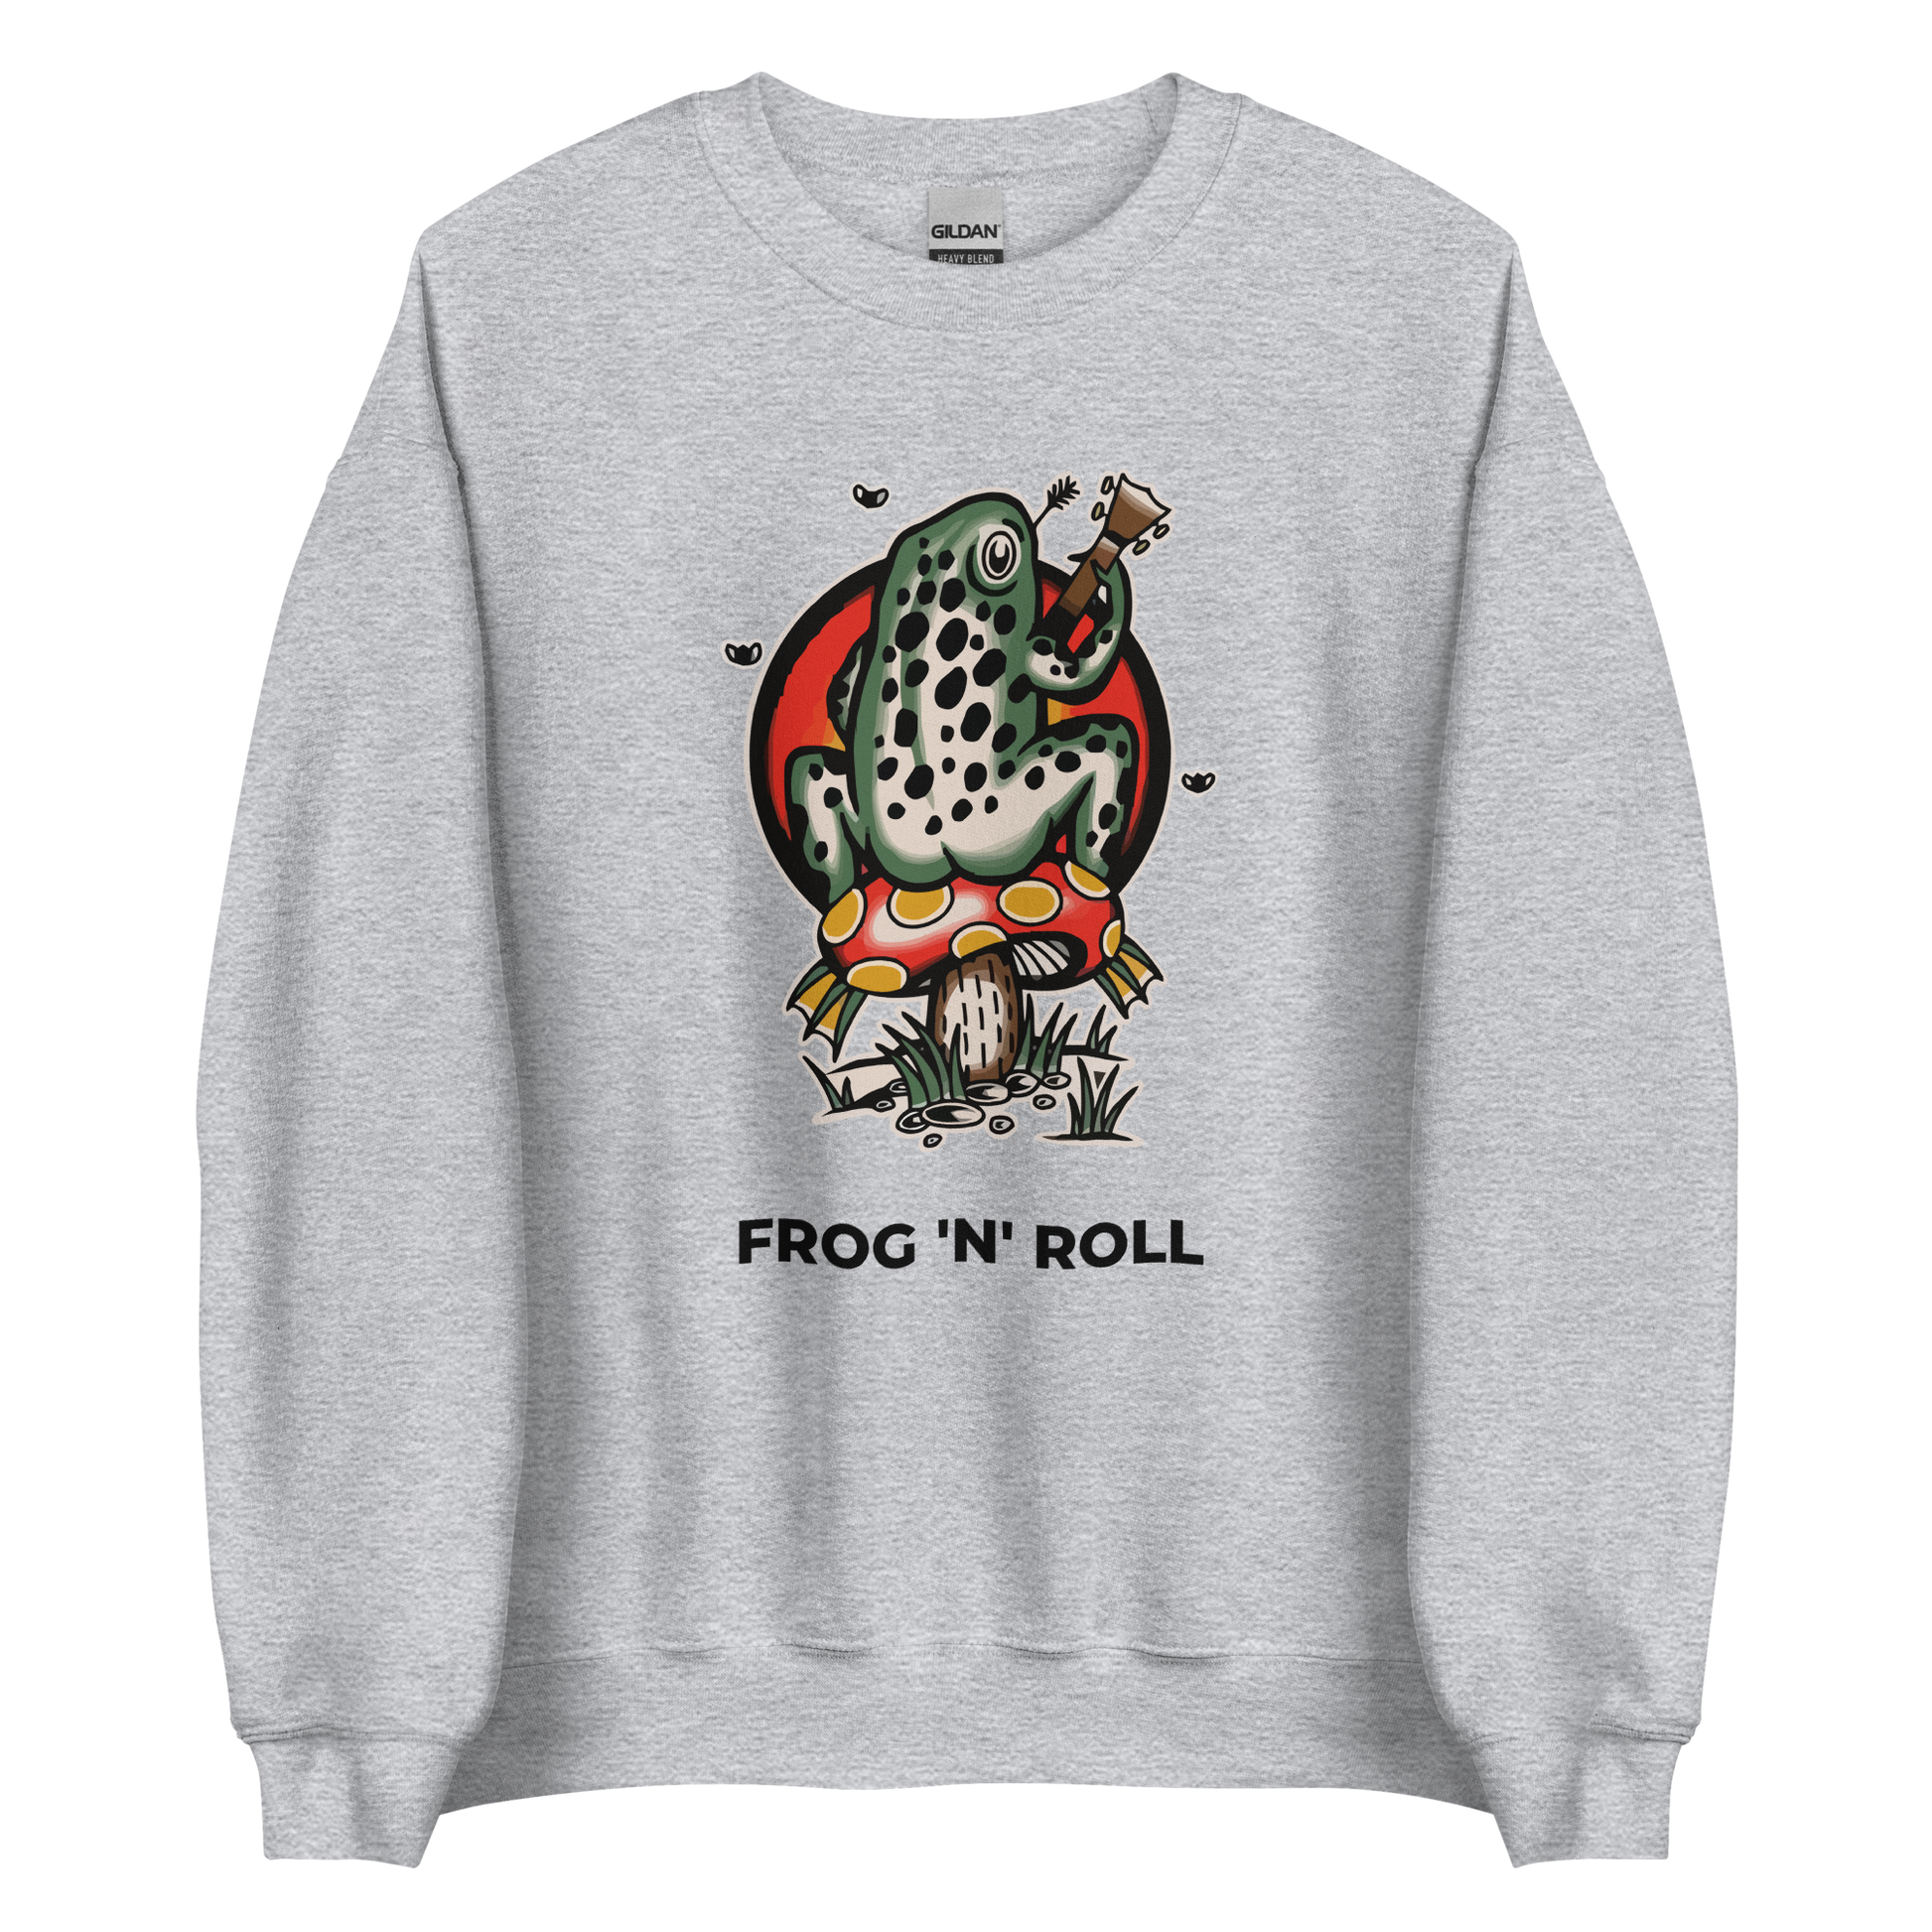 Sport Grey Frog Sweatshirt featuring the hilarious Frog 'n' Roll graphic on the chest - Funny Graphic Frog Sweatshirts - Boozy Fox